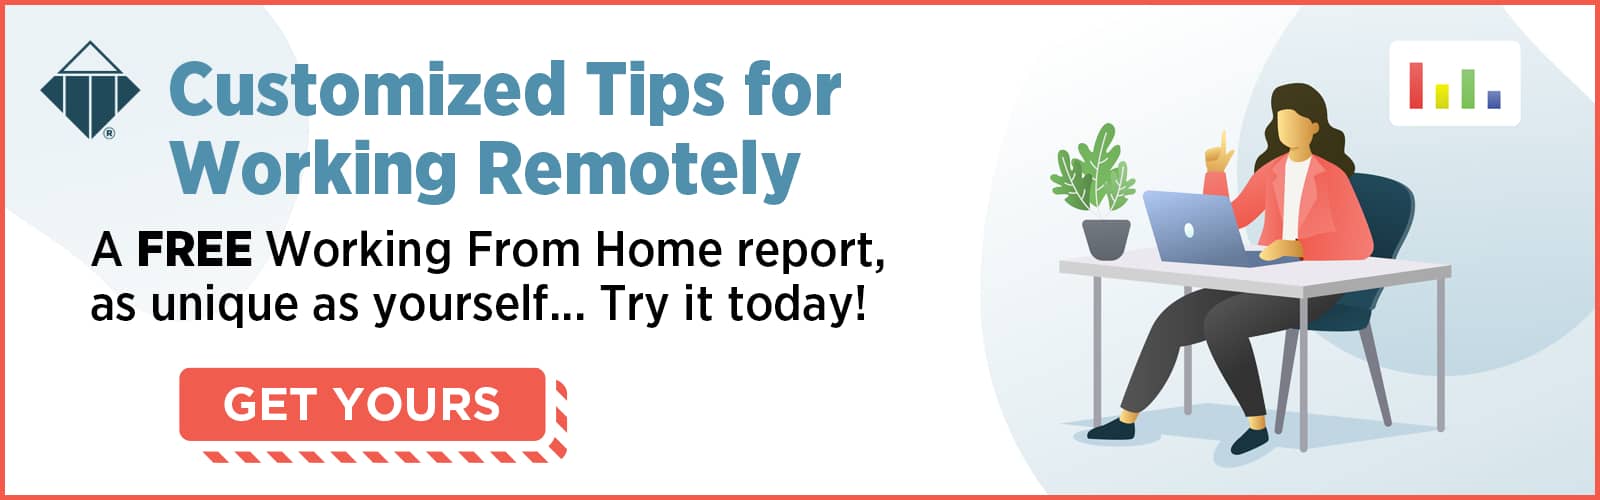 Customized Tips for Working Remotely - Get Yours